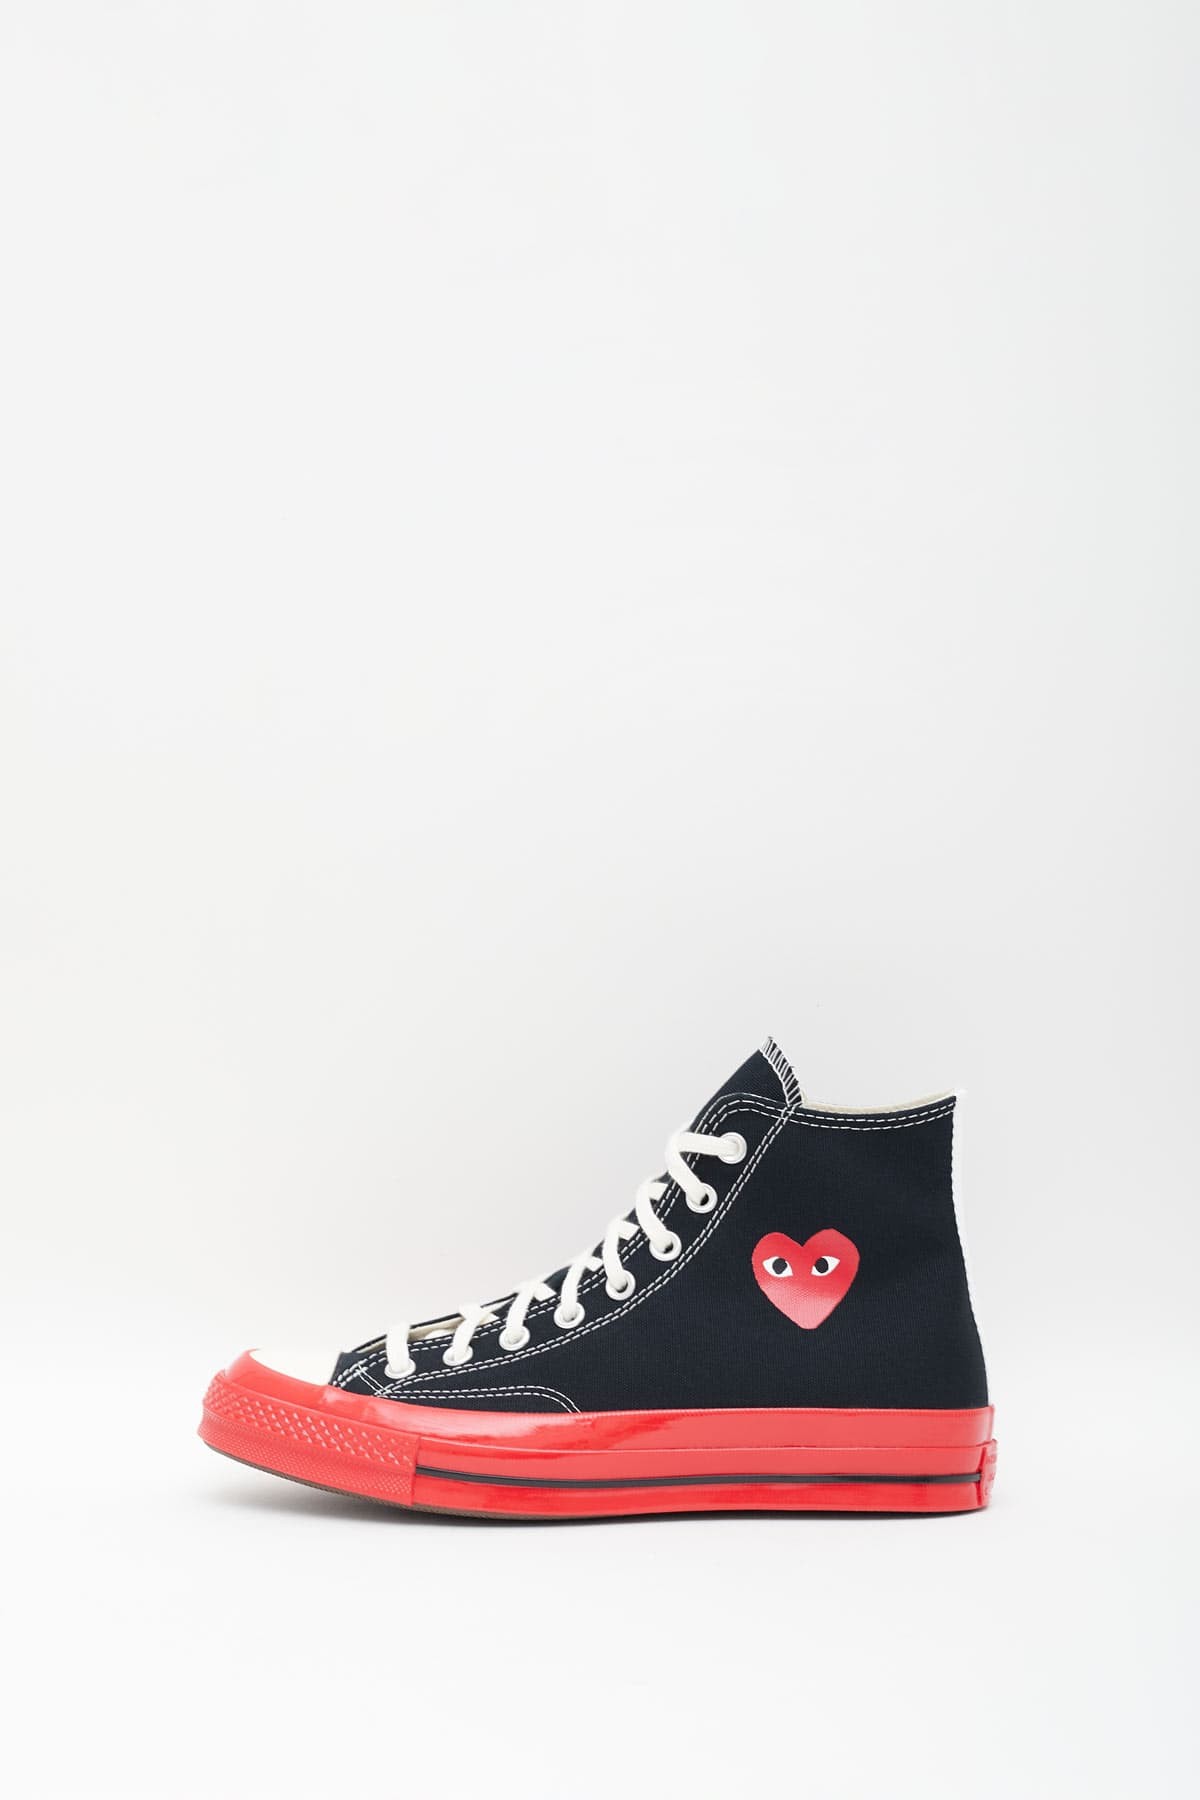 COMME DES GARCONS PLAY CONVERSE BLACK P1K124 CHUCK TAYLOR 70 HIGH SNEAKERS IAMNUE